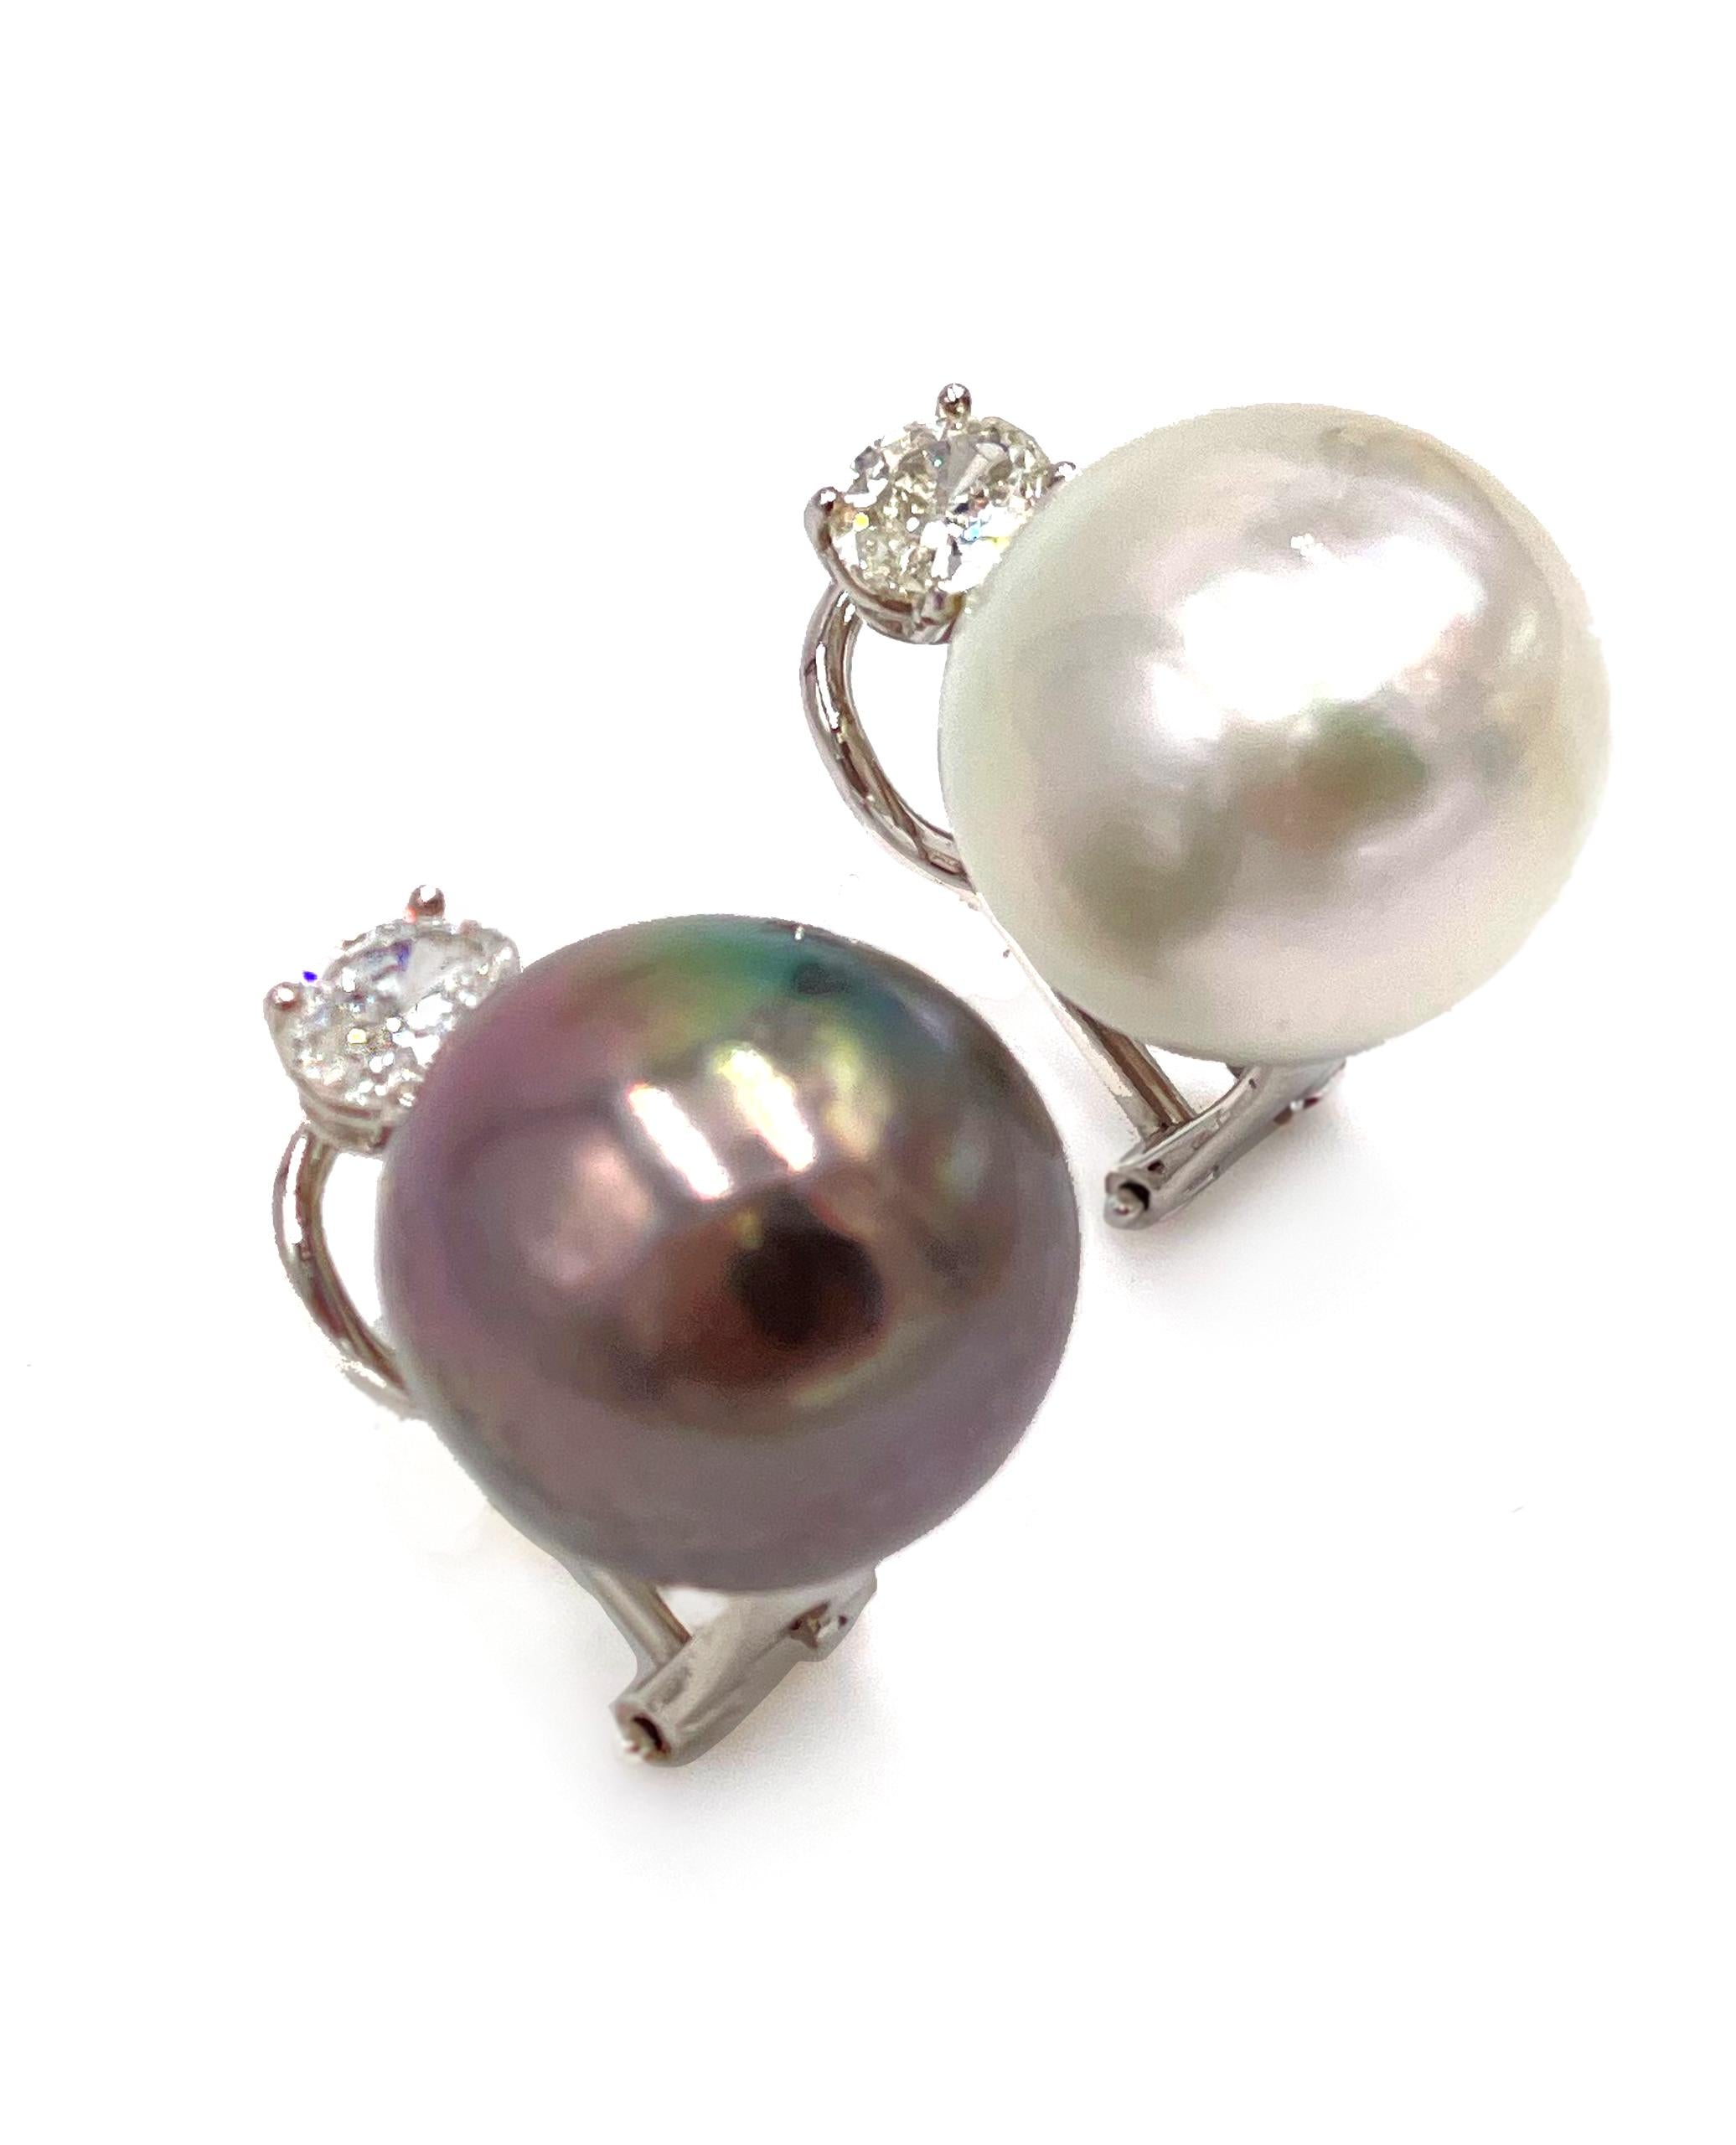 Preowned pair of 18K white gold south sea cultured pearl and diamond earrings. The earrings are peg set with a single South Sea pearl. One pearl is 15.5mm, charcoal black color, slightly baroque in shape, thick nacre and clean surface. The second